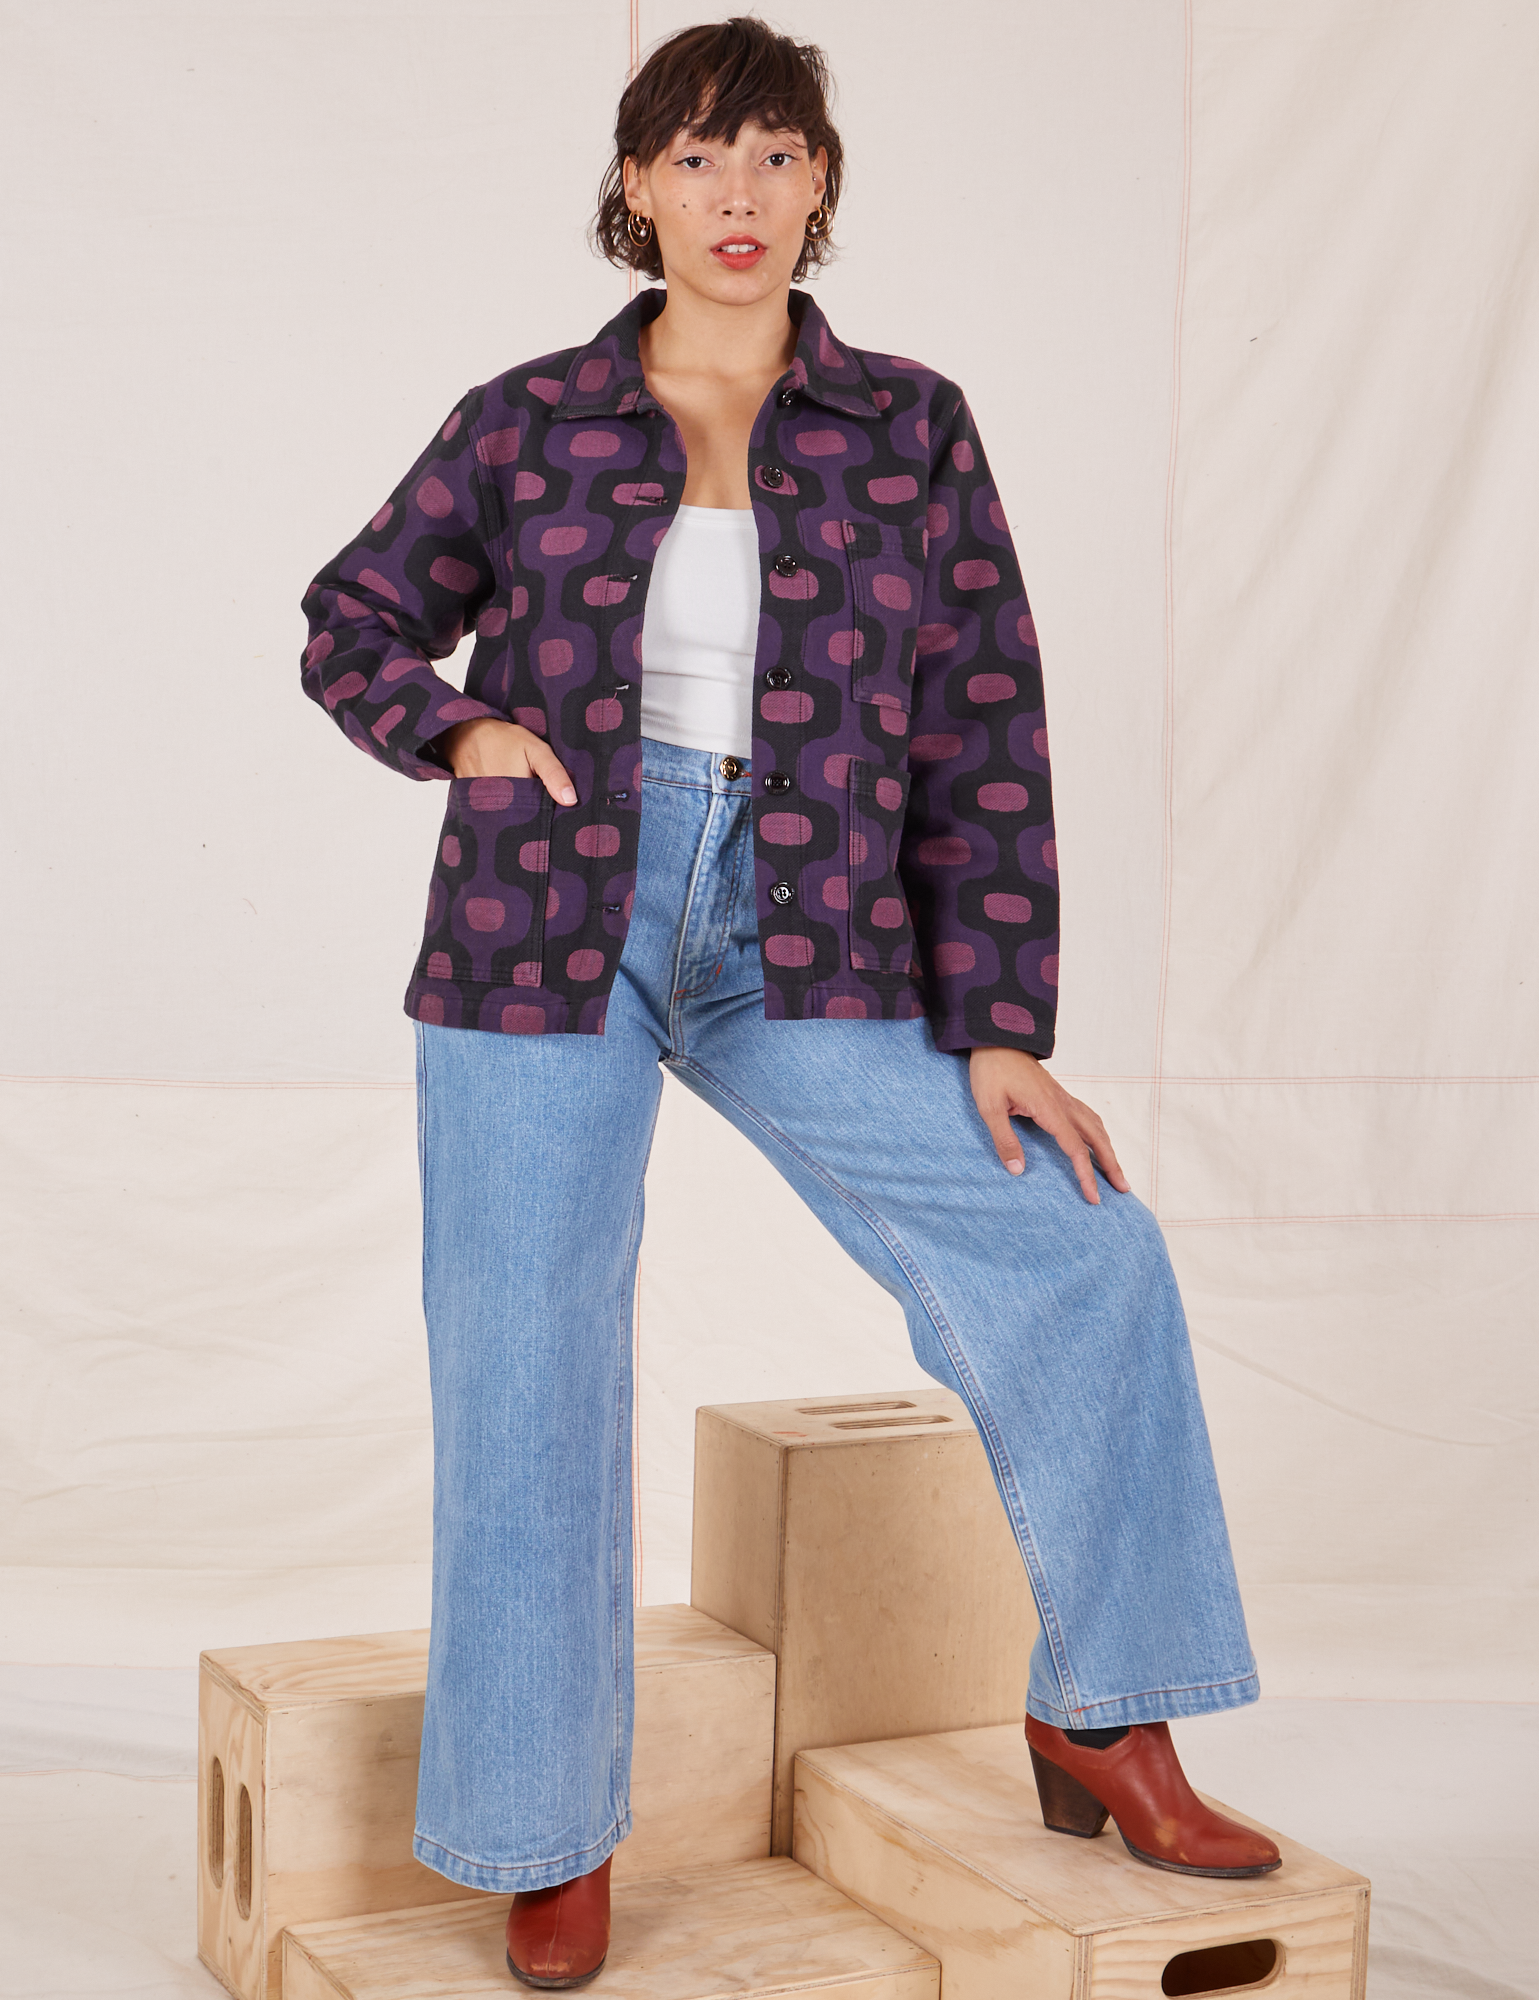 Tiara is wearing  Purple Tile Jacquard Work Jacket and light wash Frontier Jeans